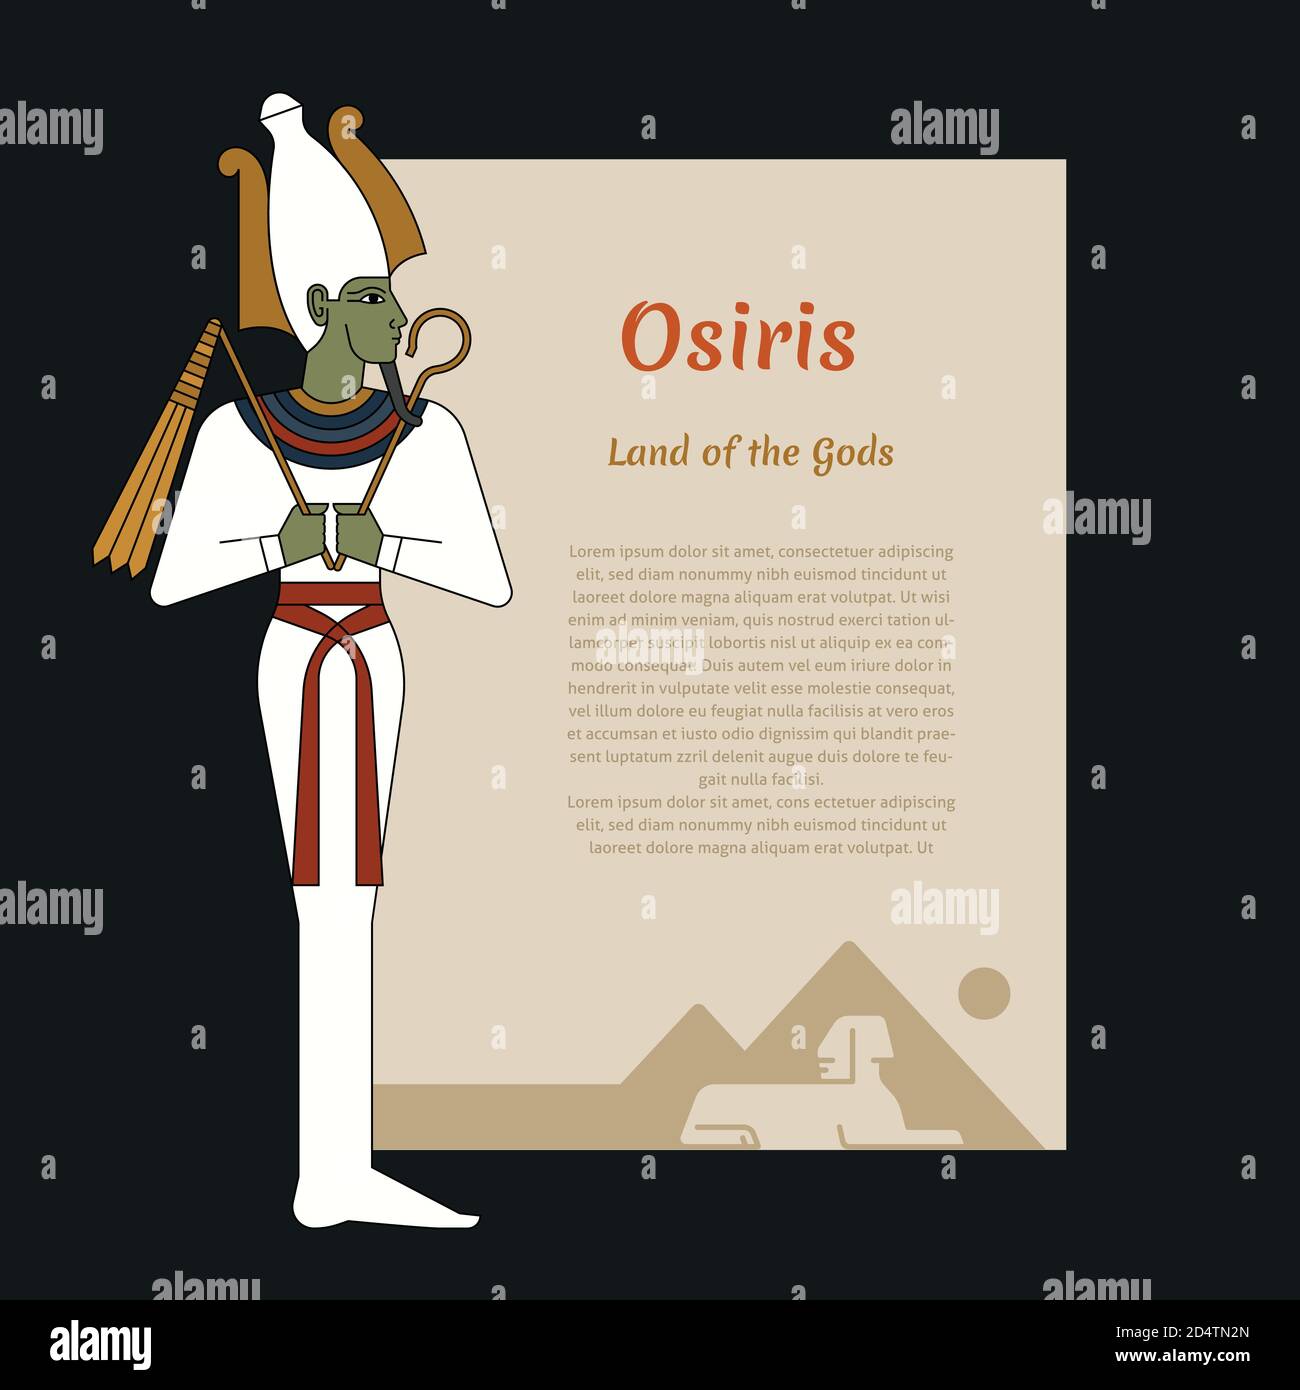 Ancient Egypt template with place for text. With illustrations of the gods of ancient Egypt Osiris. Stock Vector